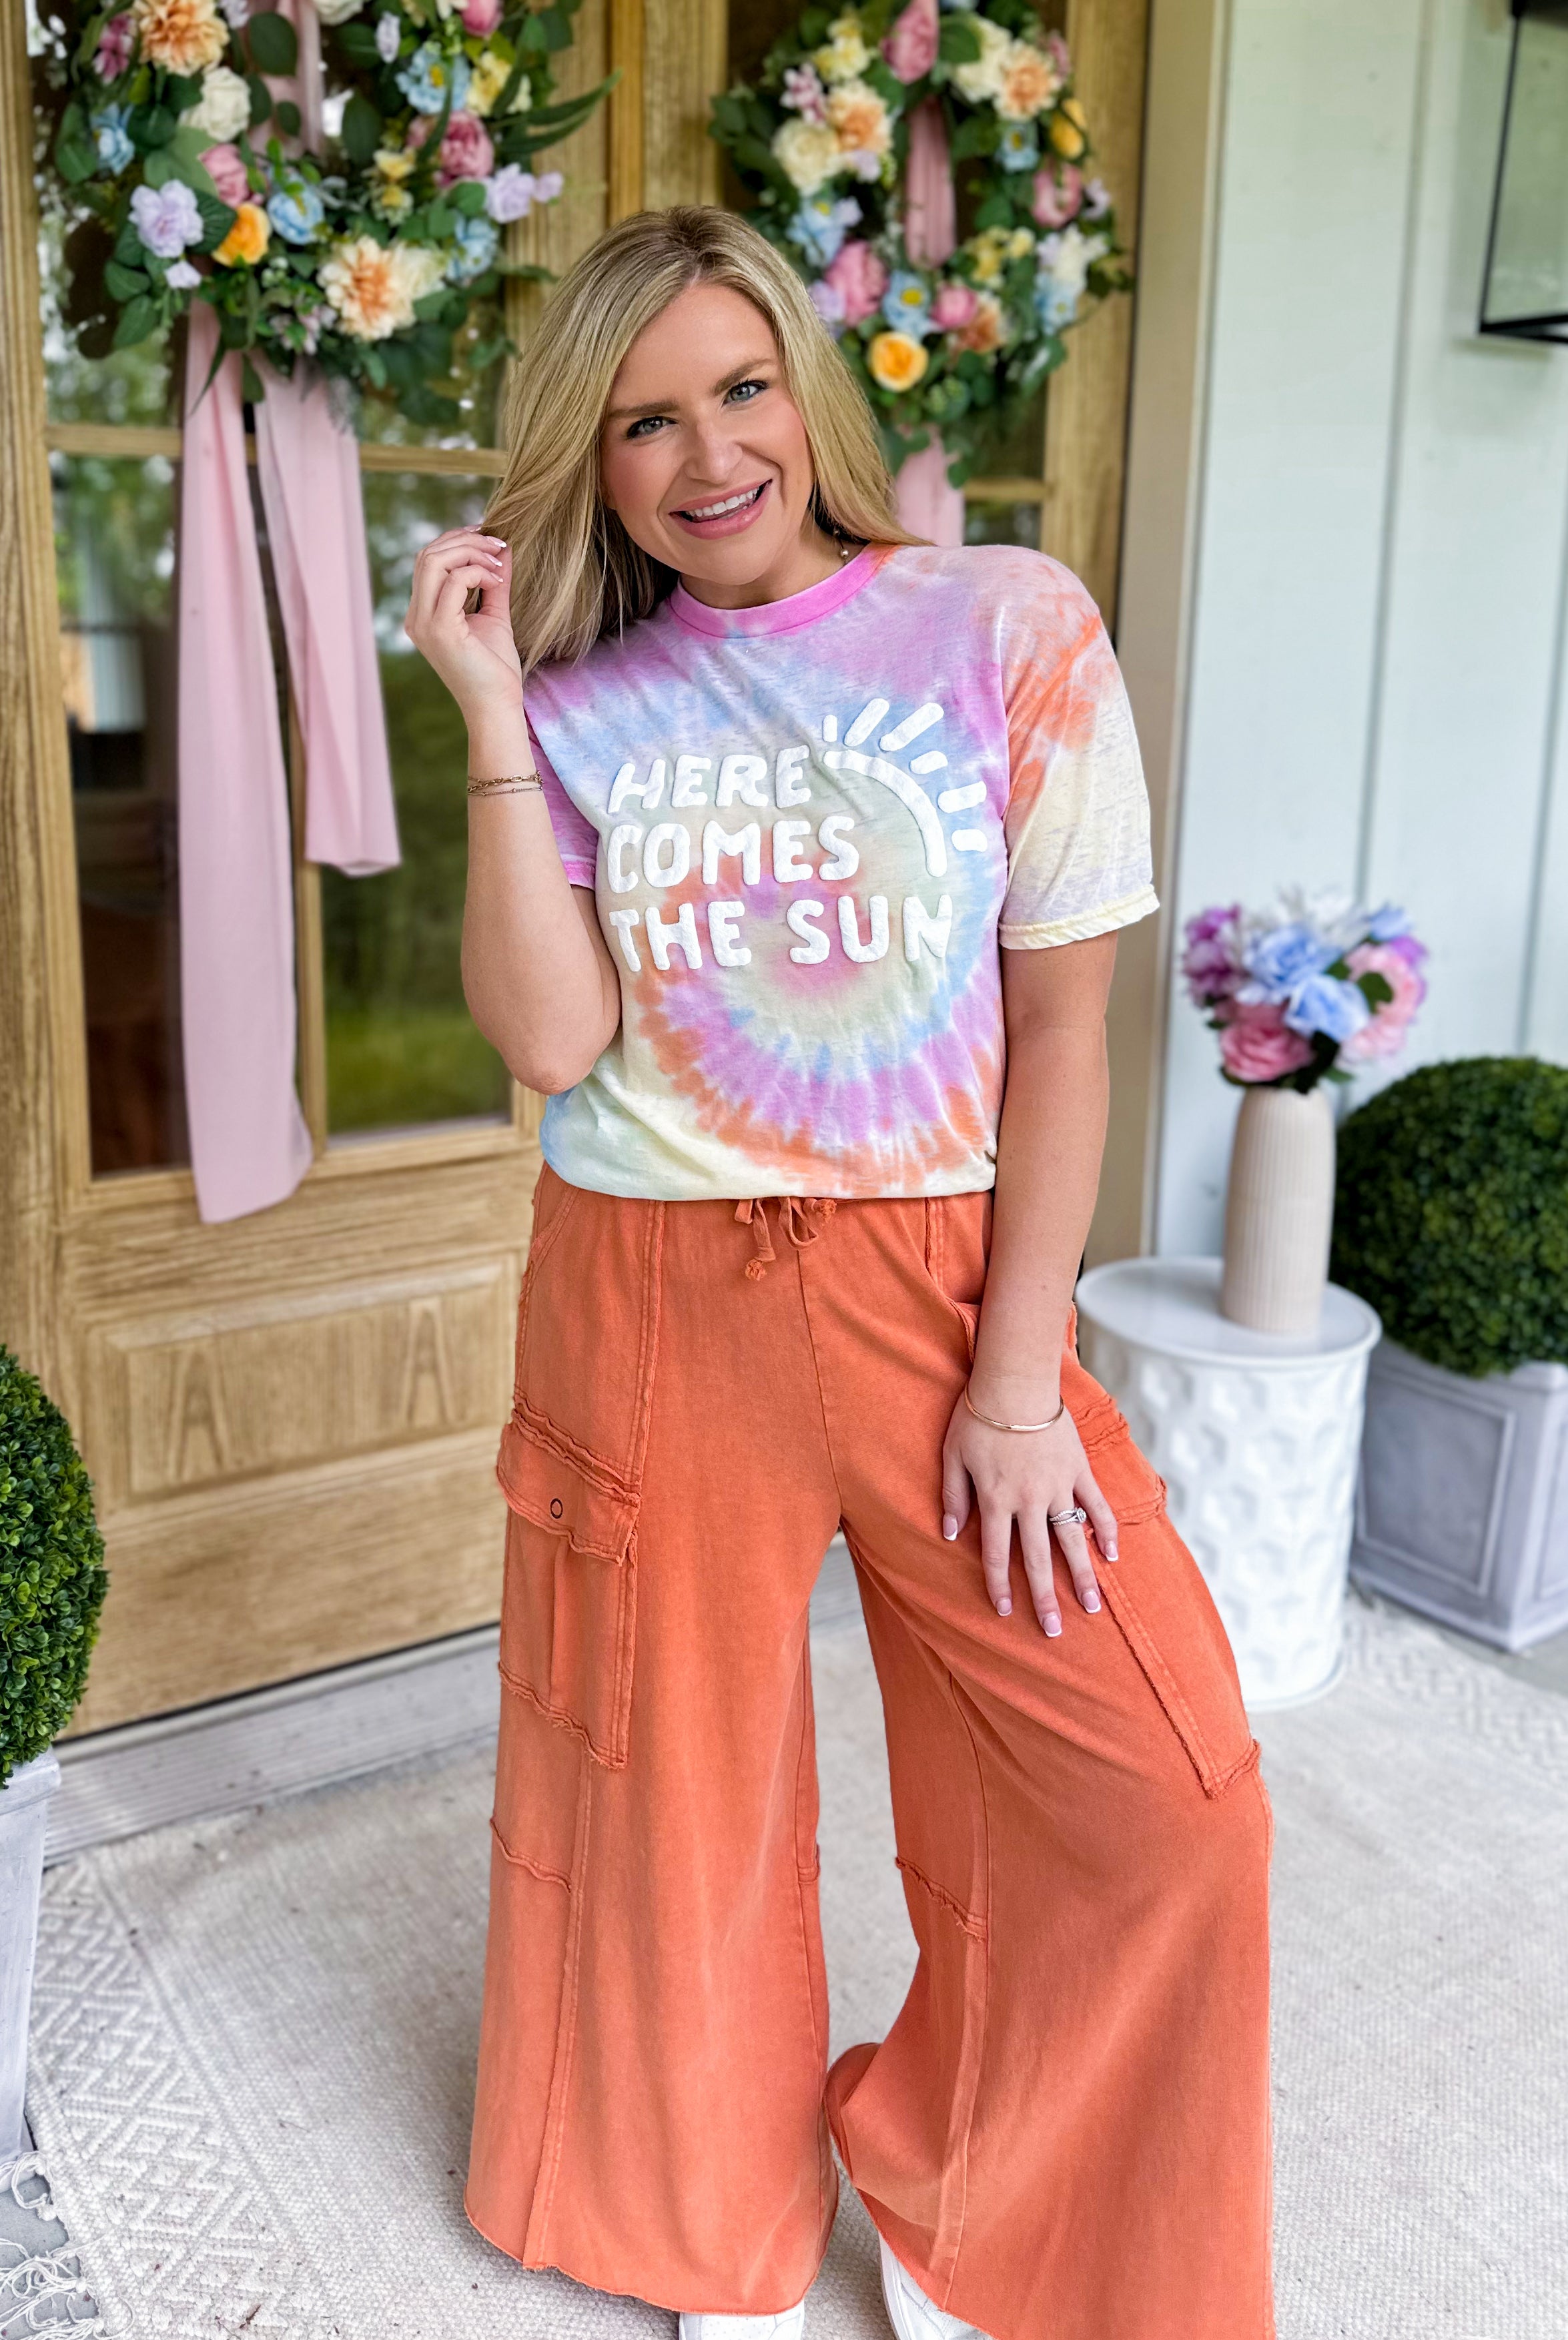 Here Comes The Sun Pastel Tie Dye Tee - Be You Boutique